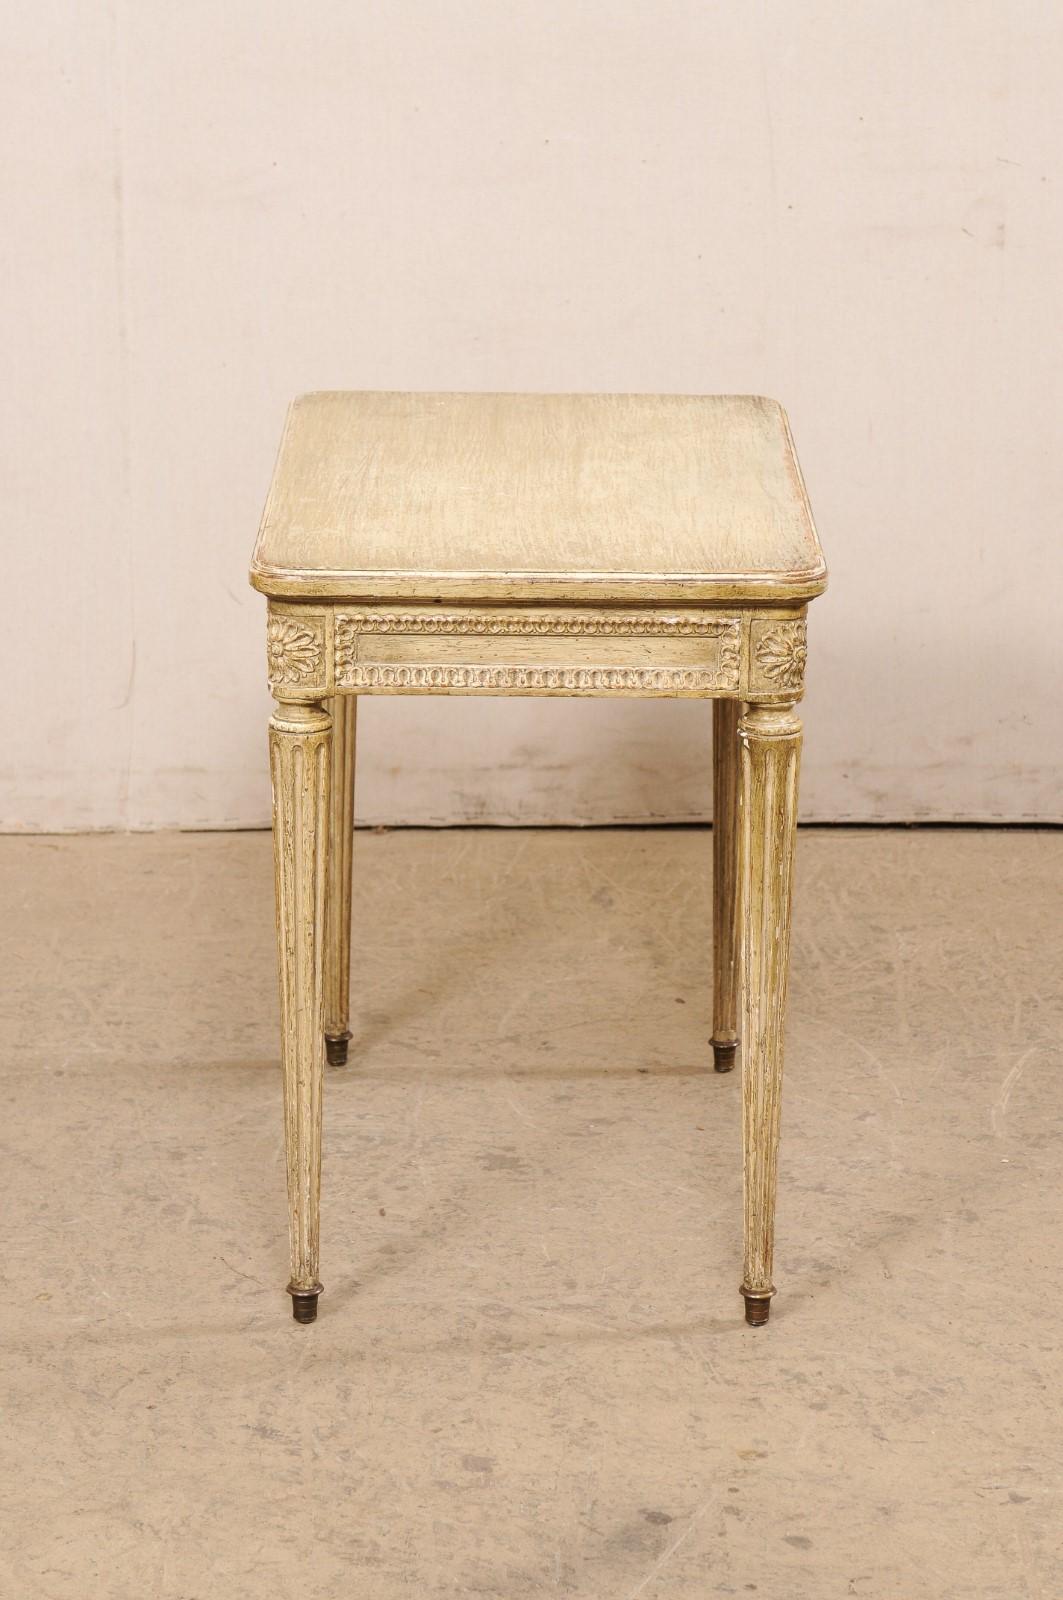 Louis XVI Style French Side Table with its Original Painted Finish Early 20th C. For Sale 1